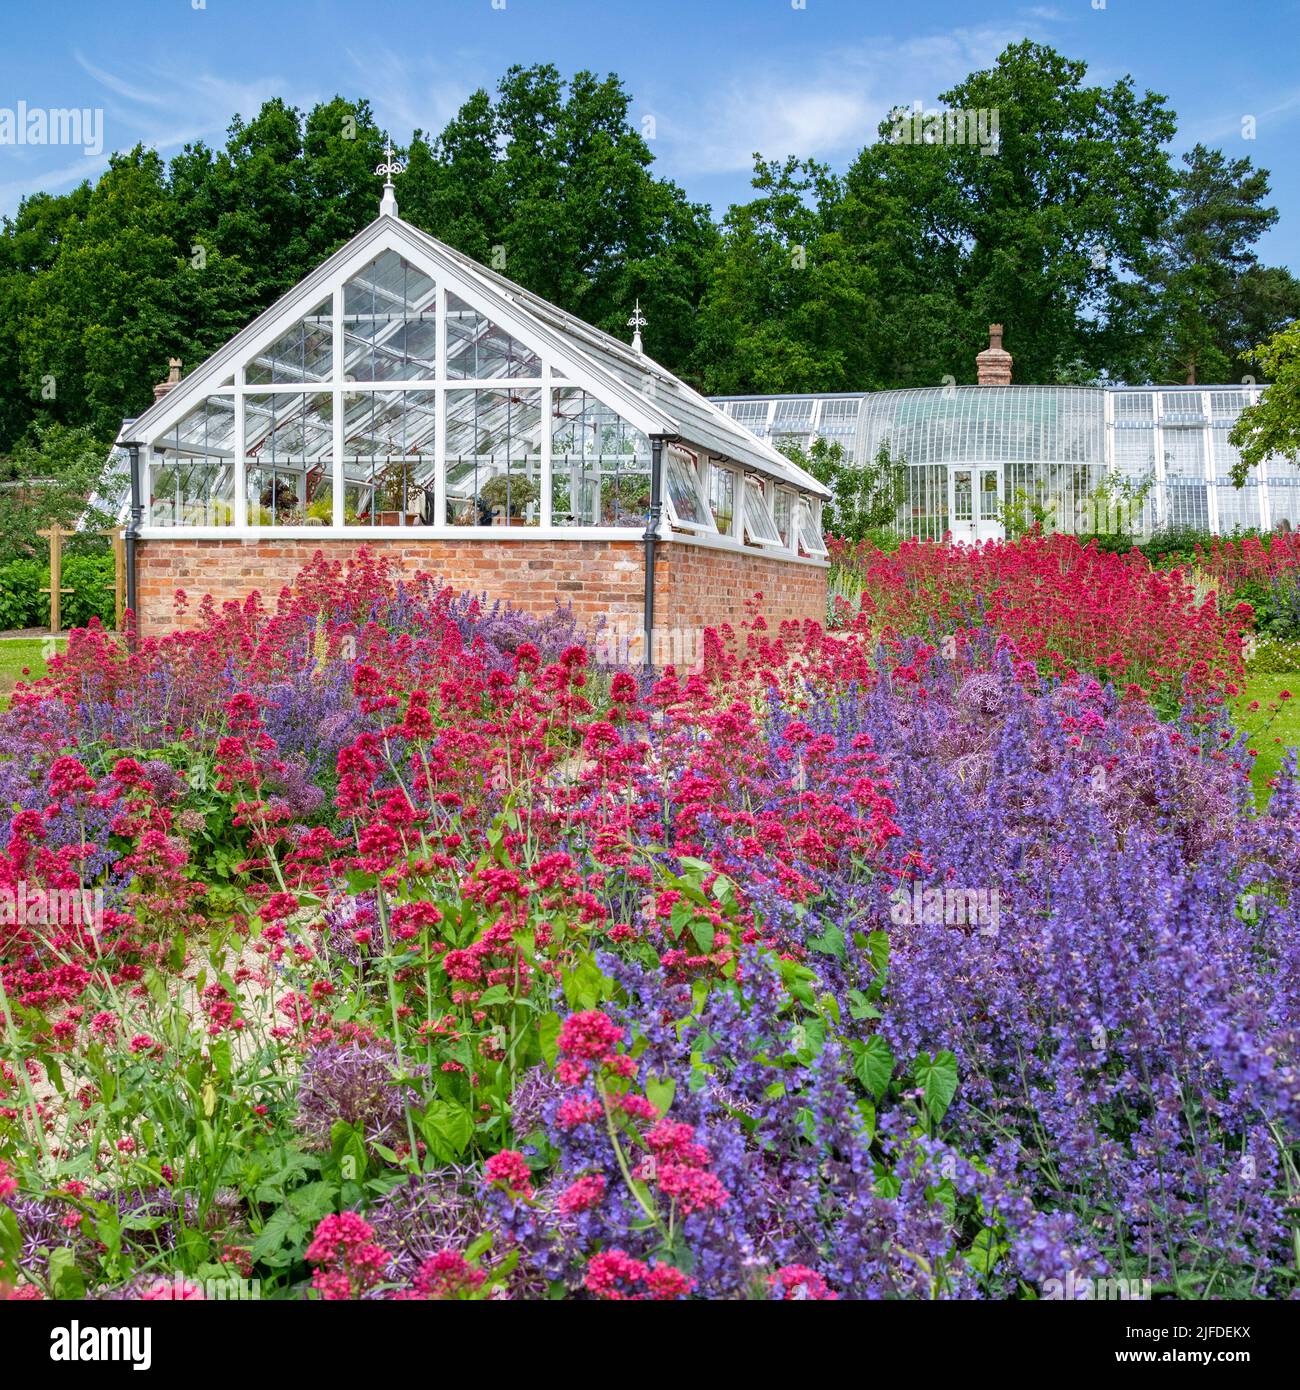 Greenhouse and colorful flowers in a garden in northwest England. Stock Photo